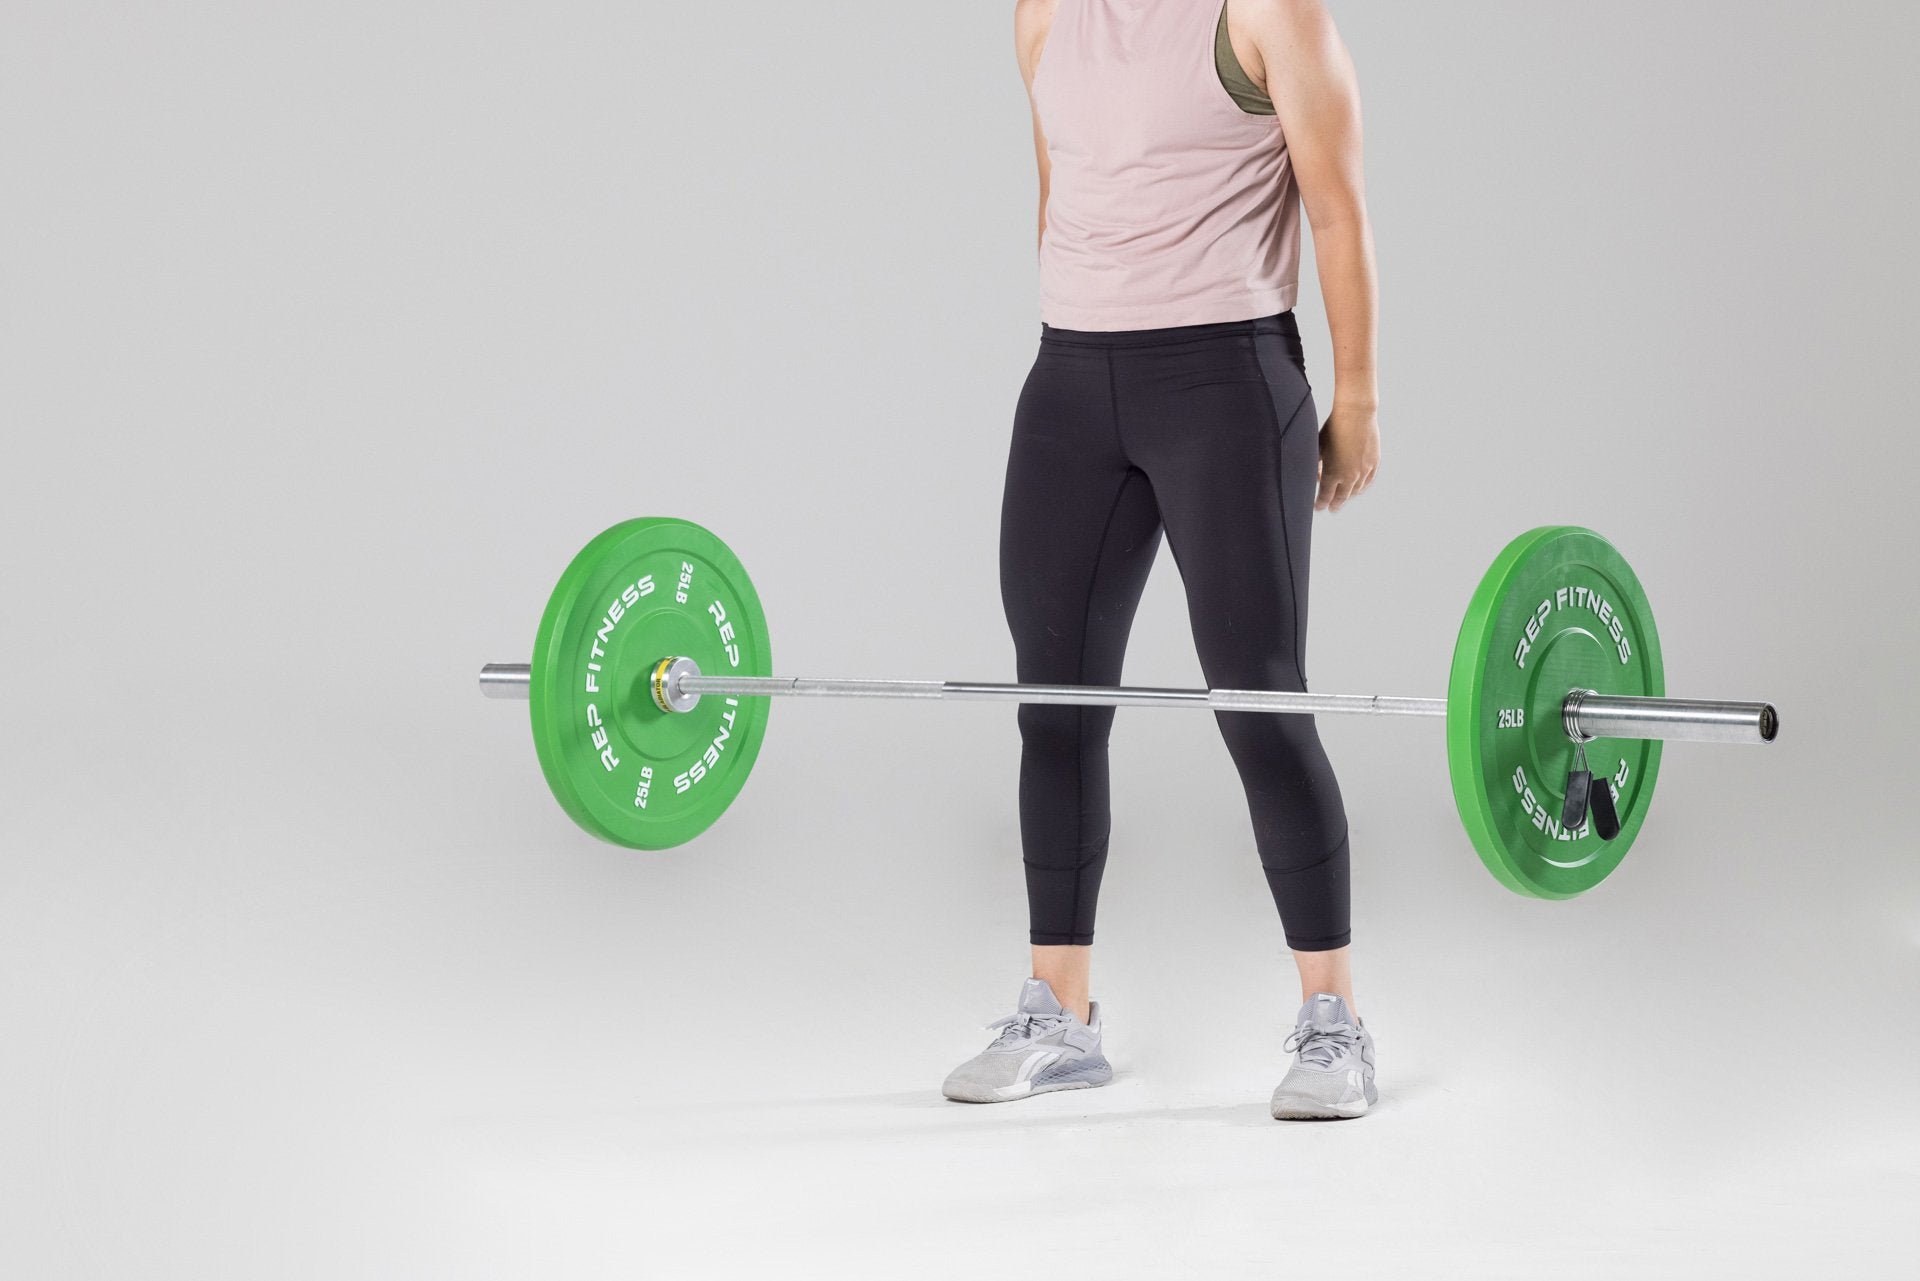 A barbell loaded with a pair of green 25lb colored bumper plates falling to the ground after being dropped by a lifter.